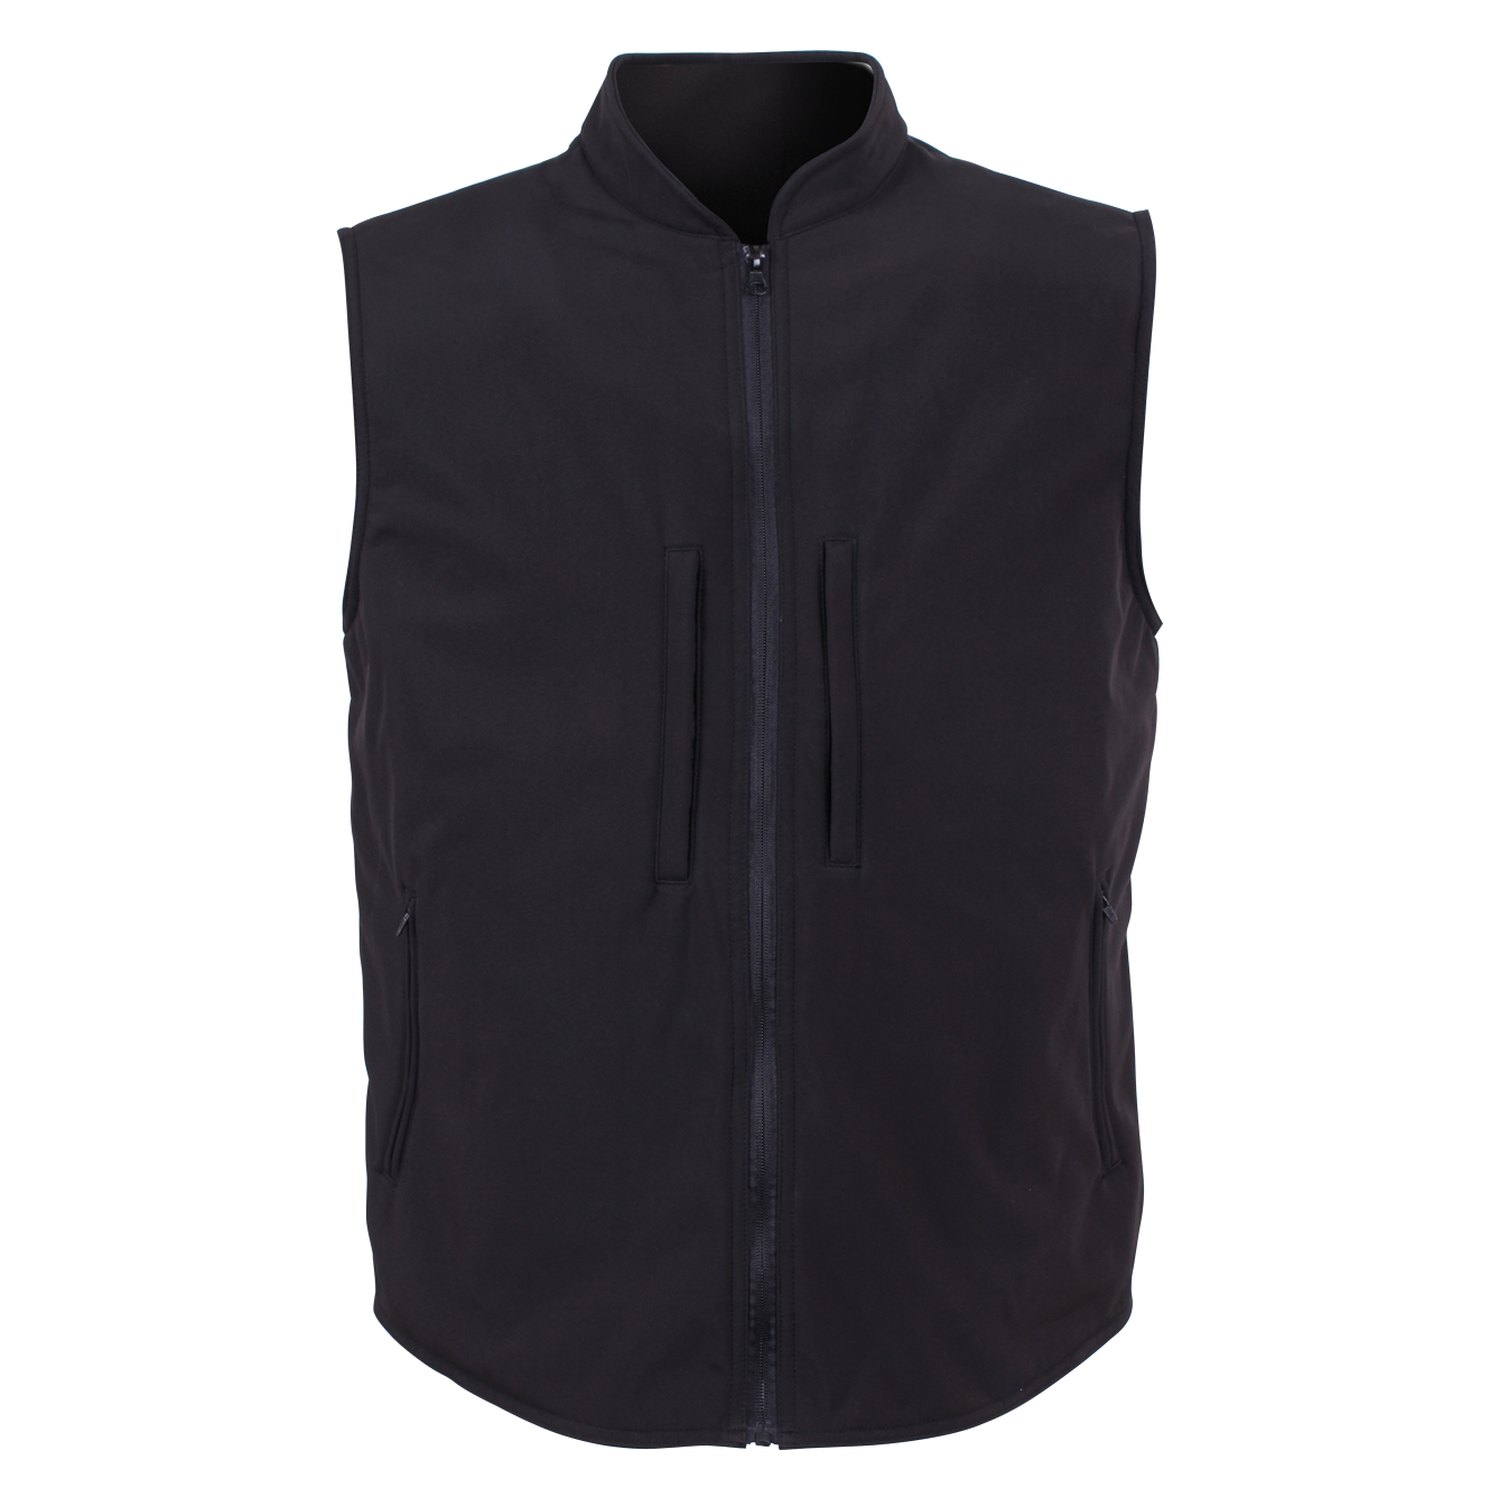 Rothco - Concealed Carry Soft Shell Security Black Vest